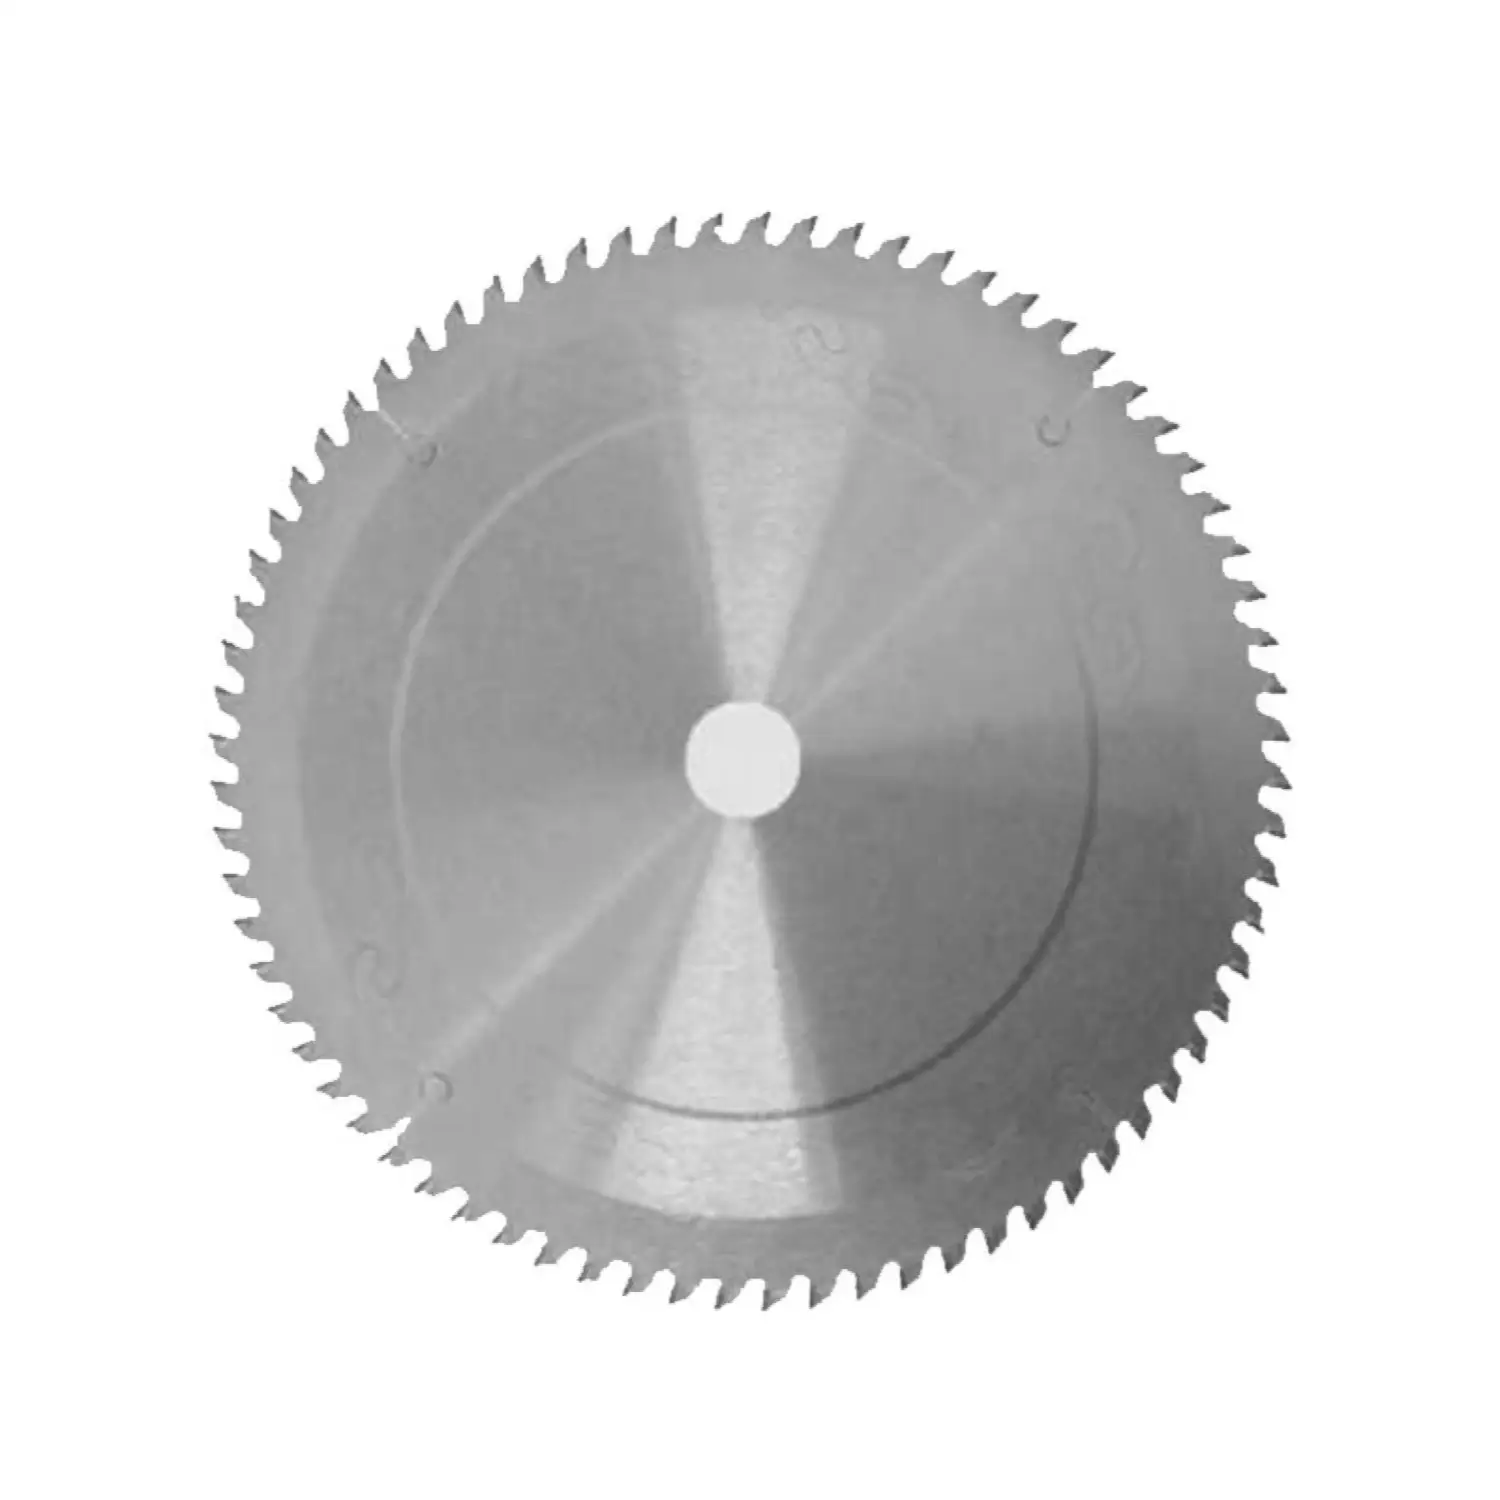 Innovative Saw Blades for Woodworking - D380X4.4/3.2 d60 Z72 TR/FZ +2/14/100 PCD Panel Sizing - Superior Woodwork Cuts